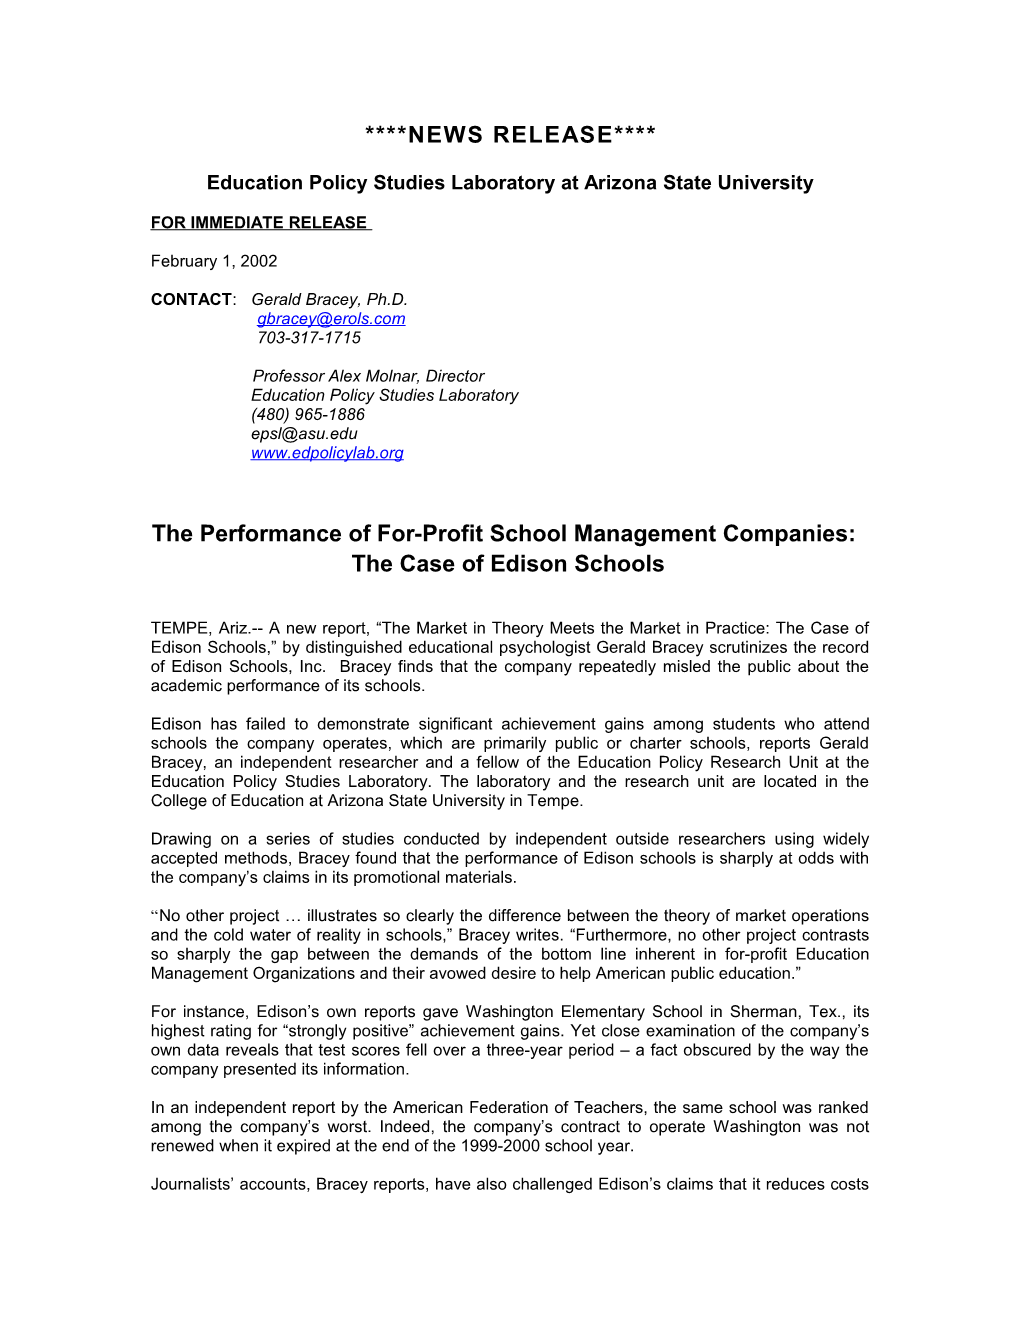 Press Release For: the Market in Theory Meets the Market in Practice: the Case of Edison Schools